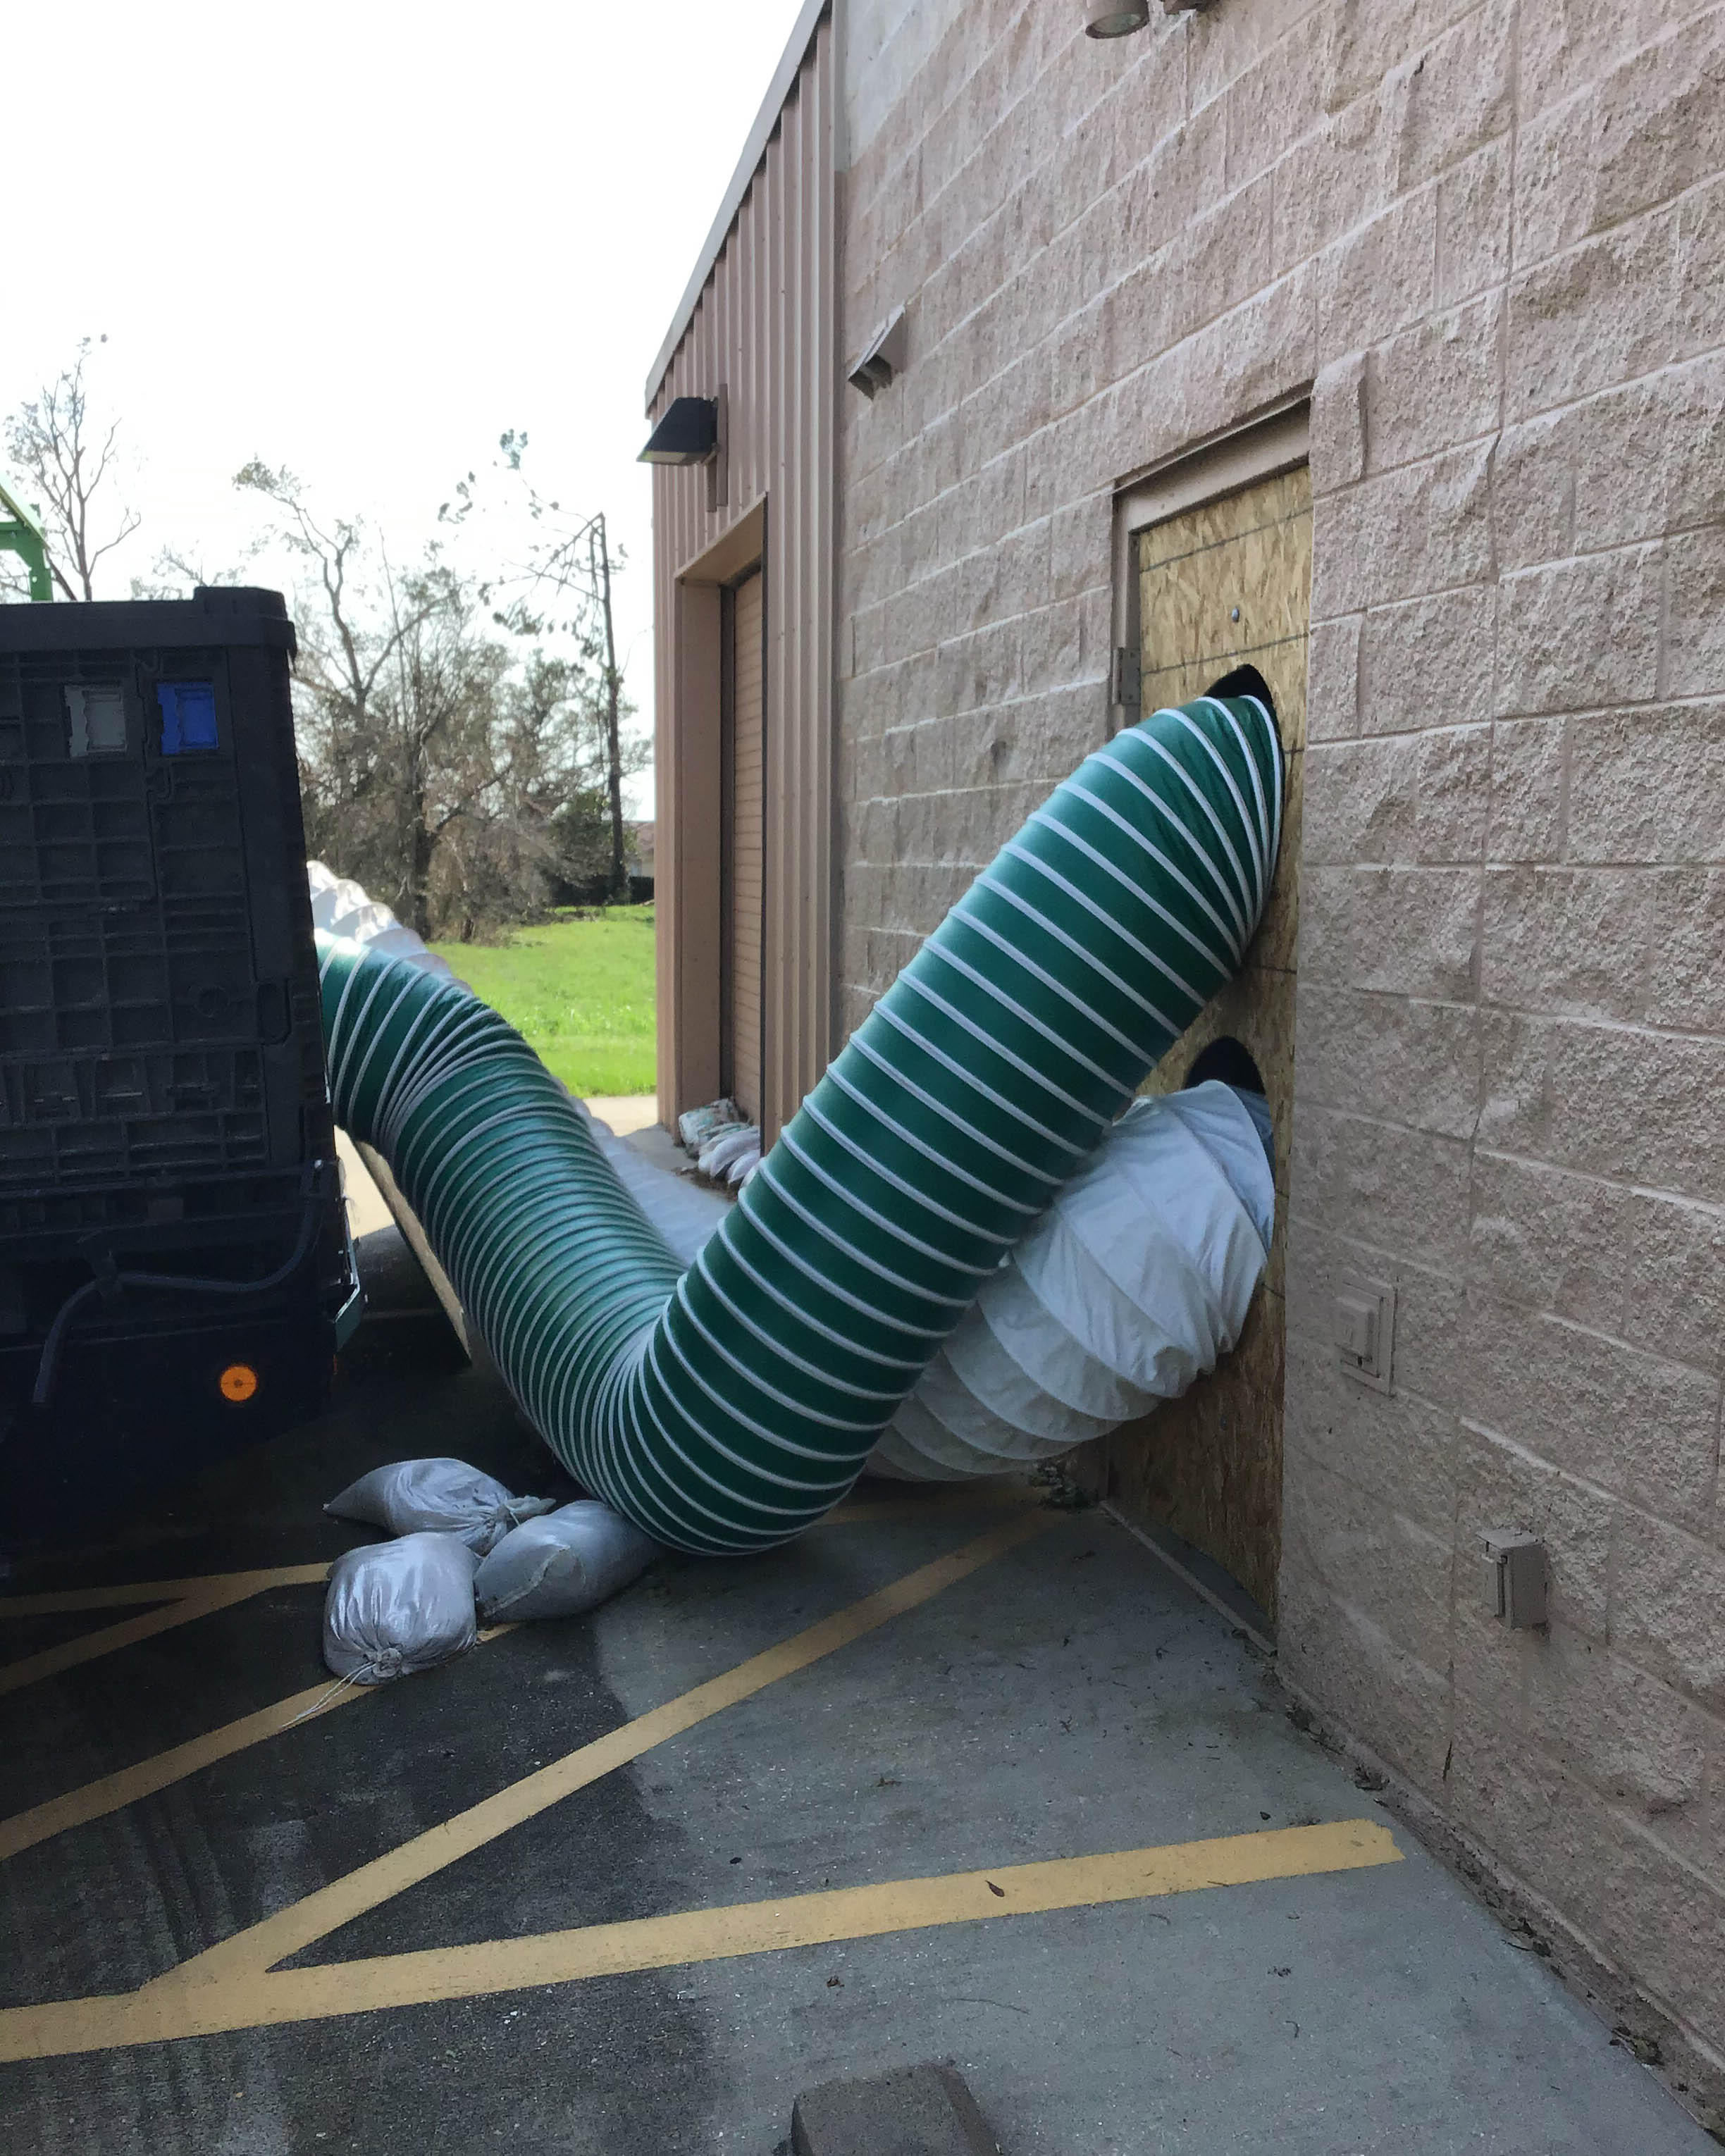 Look no further than SERVPRO of Arnold/North Jefferson County if you're seeking for the best restoration company. When it comes to commercial disaster restoration in the Byrnes Mill, MO area, they are the best option. Contact us at anytime!